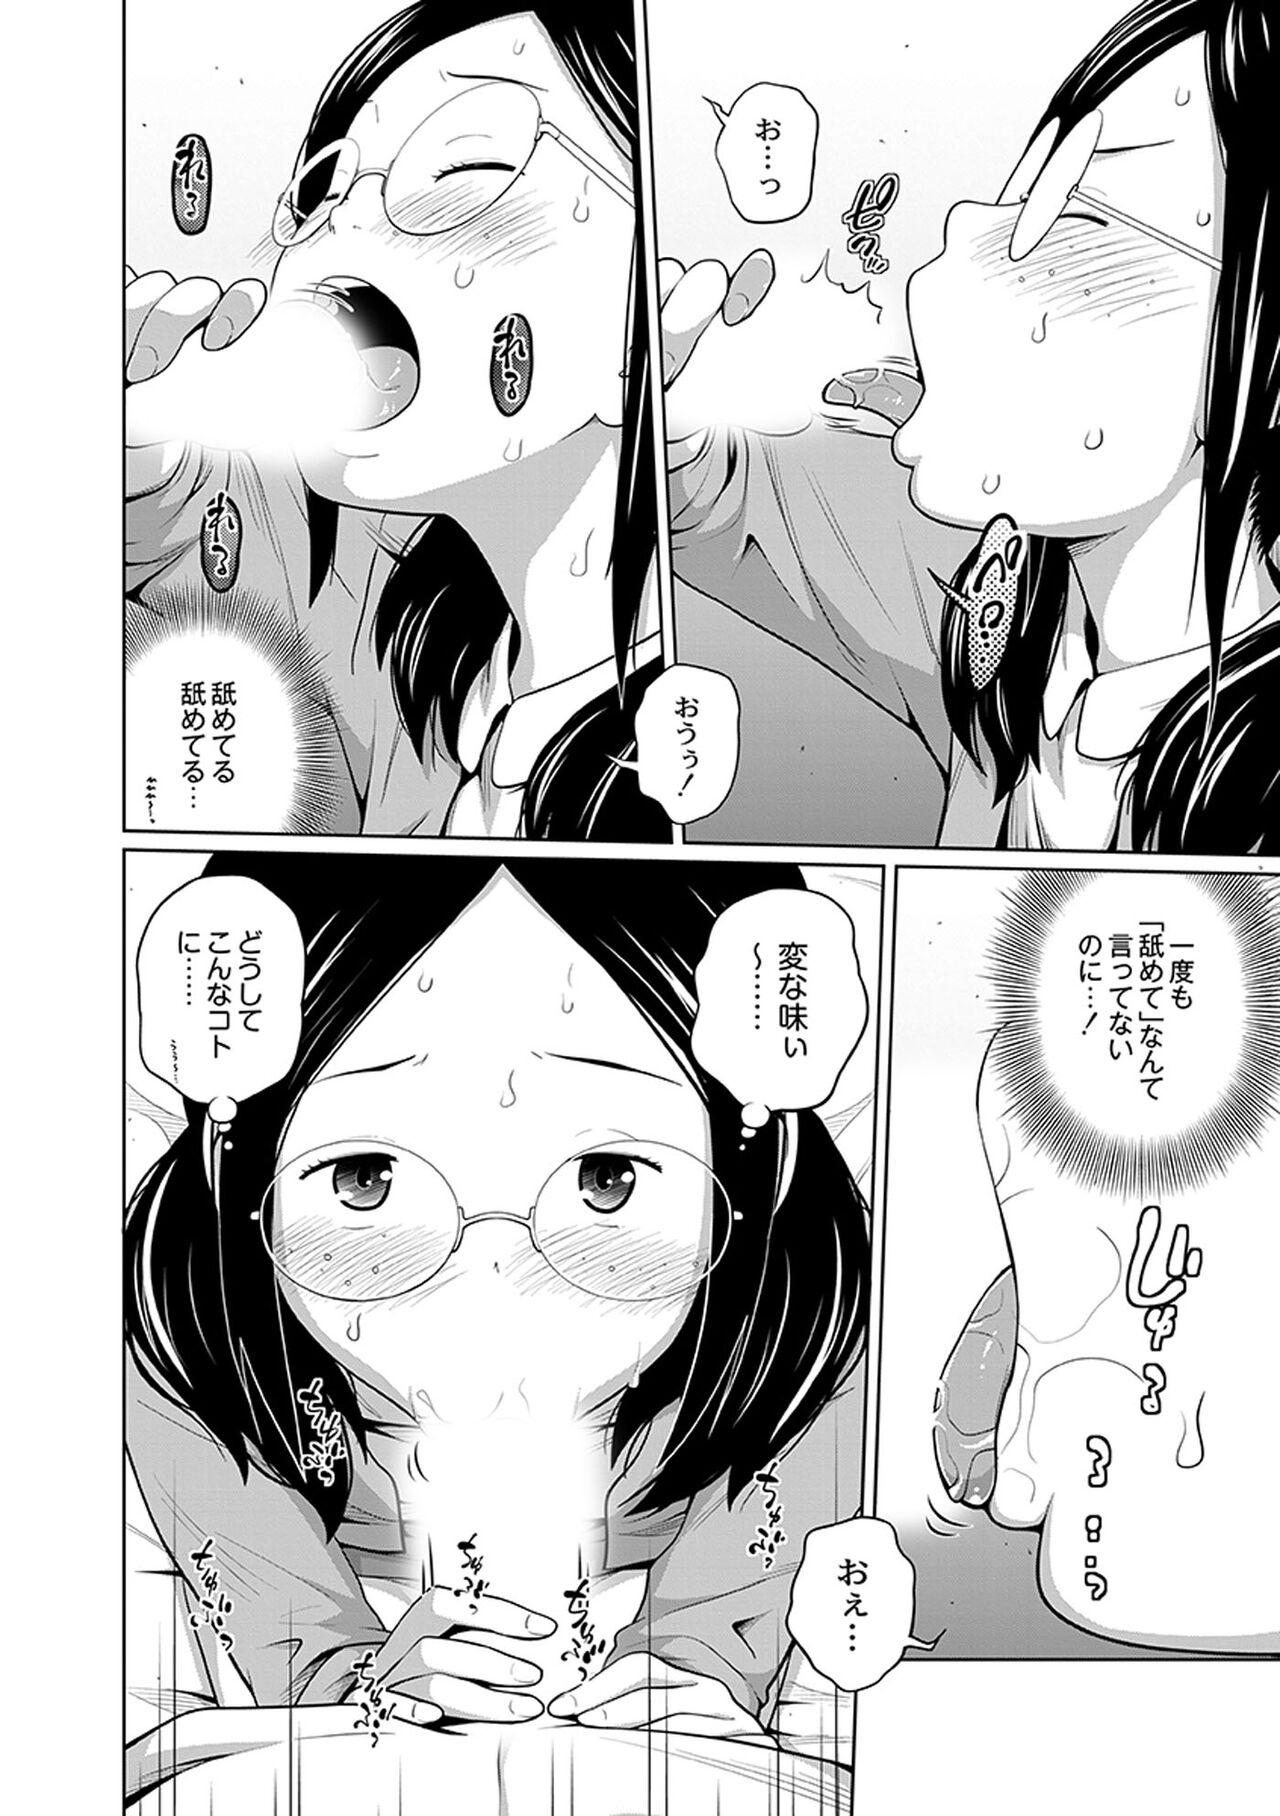 Shemale Sex Ane Megane - spectacled sister Private Sex - Page 10